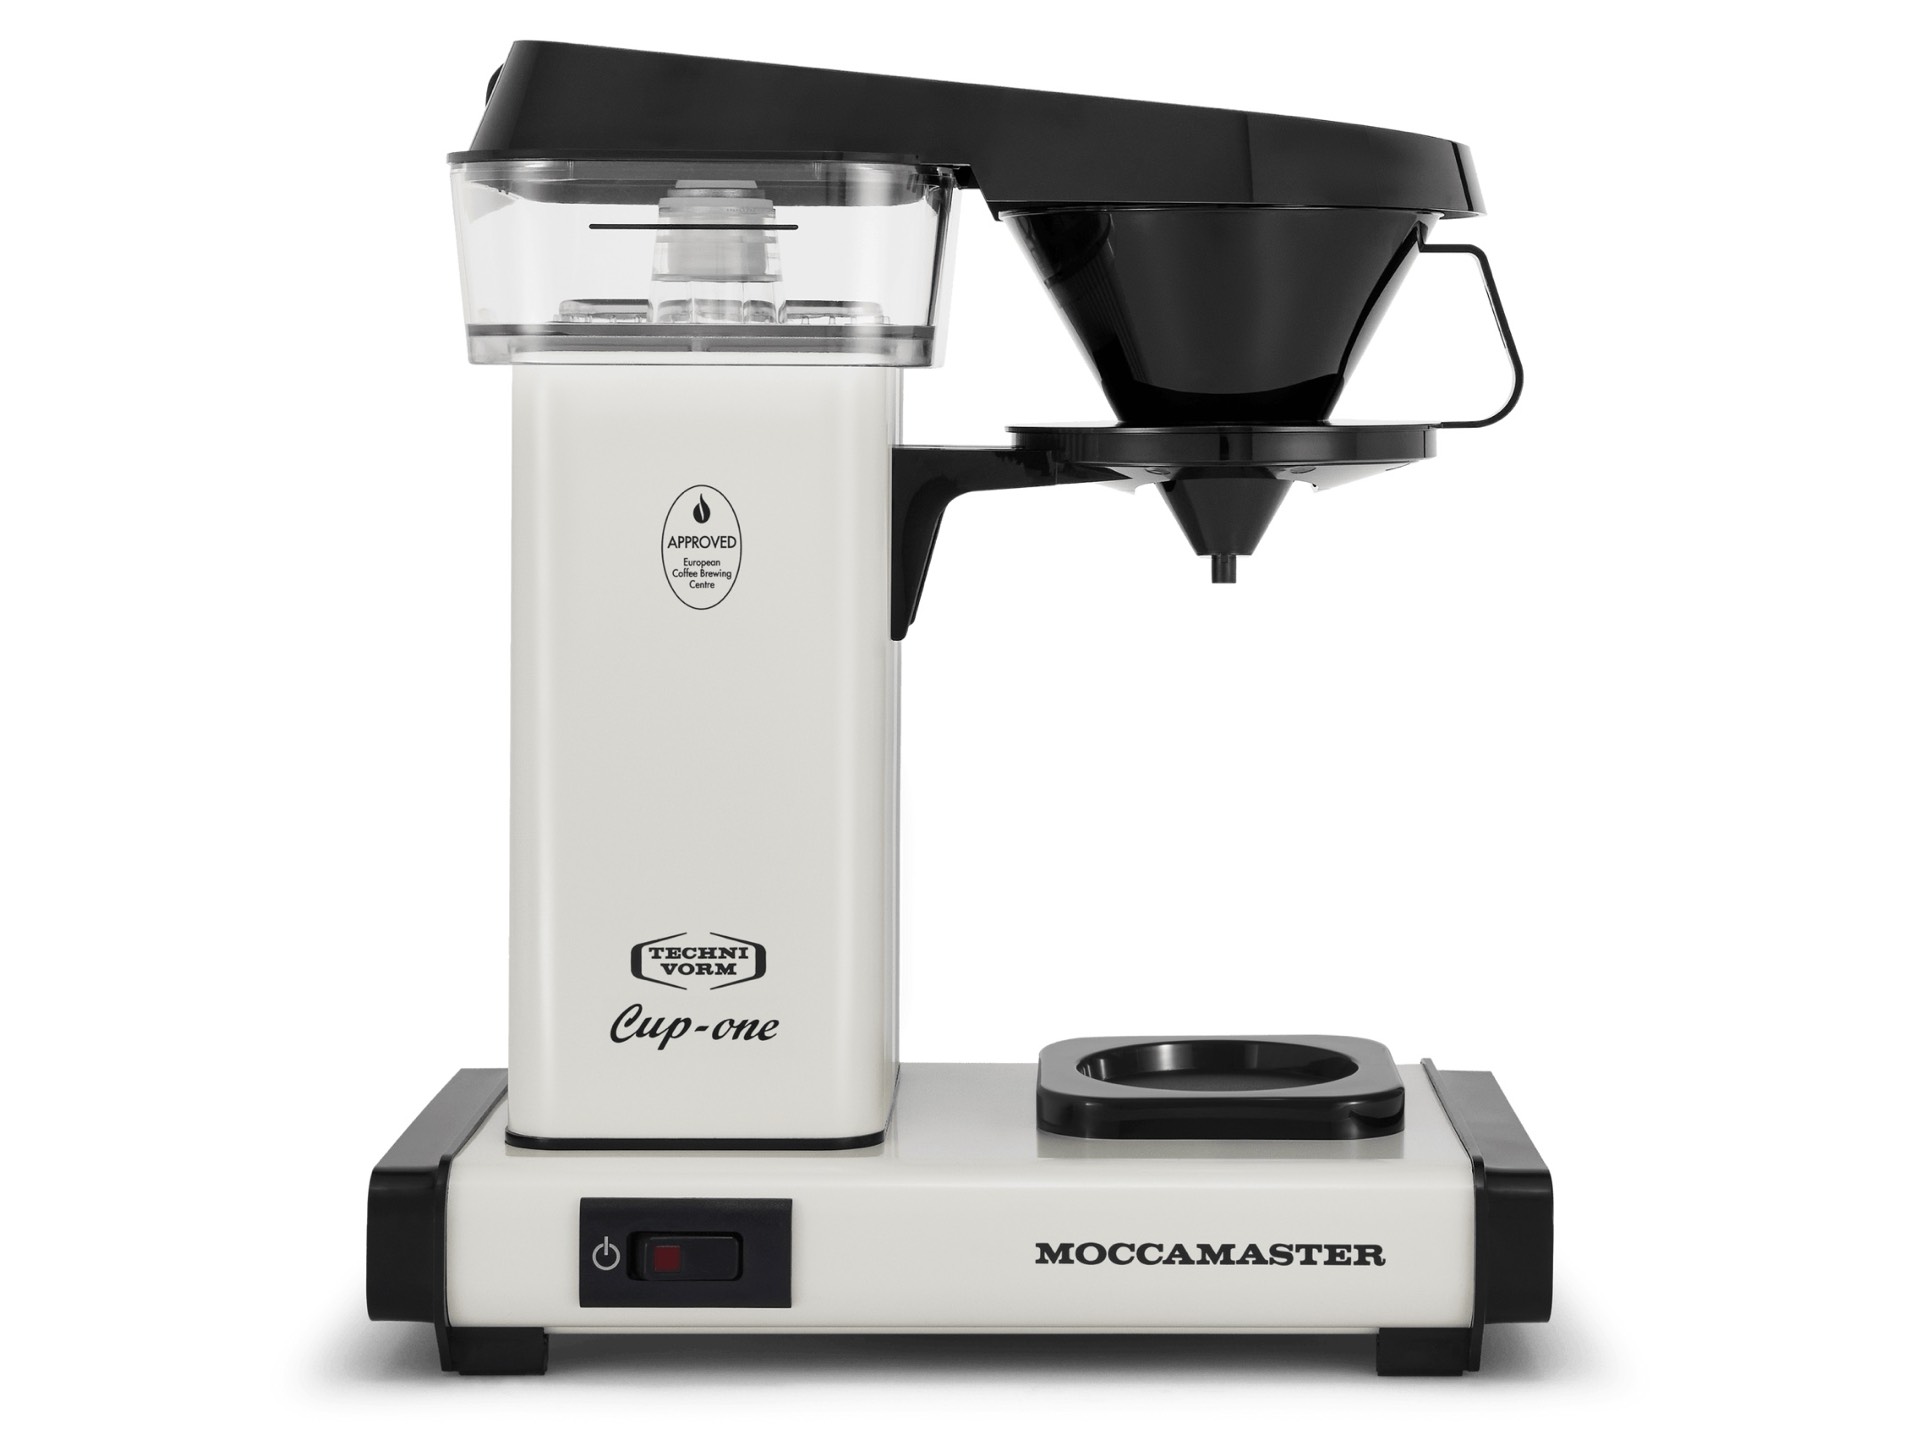 technivorm-moccamaster-cup-one-single-serving-coffee-maker